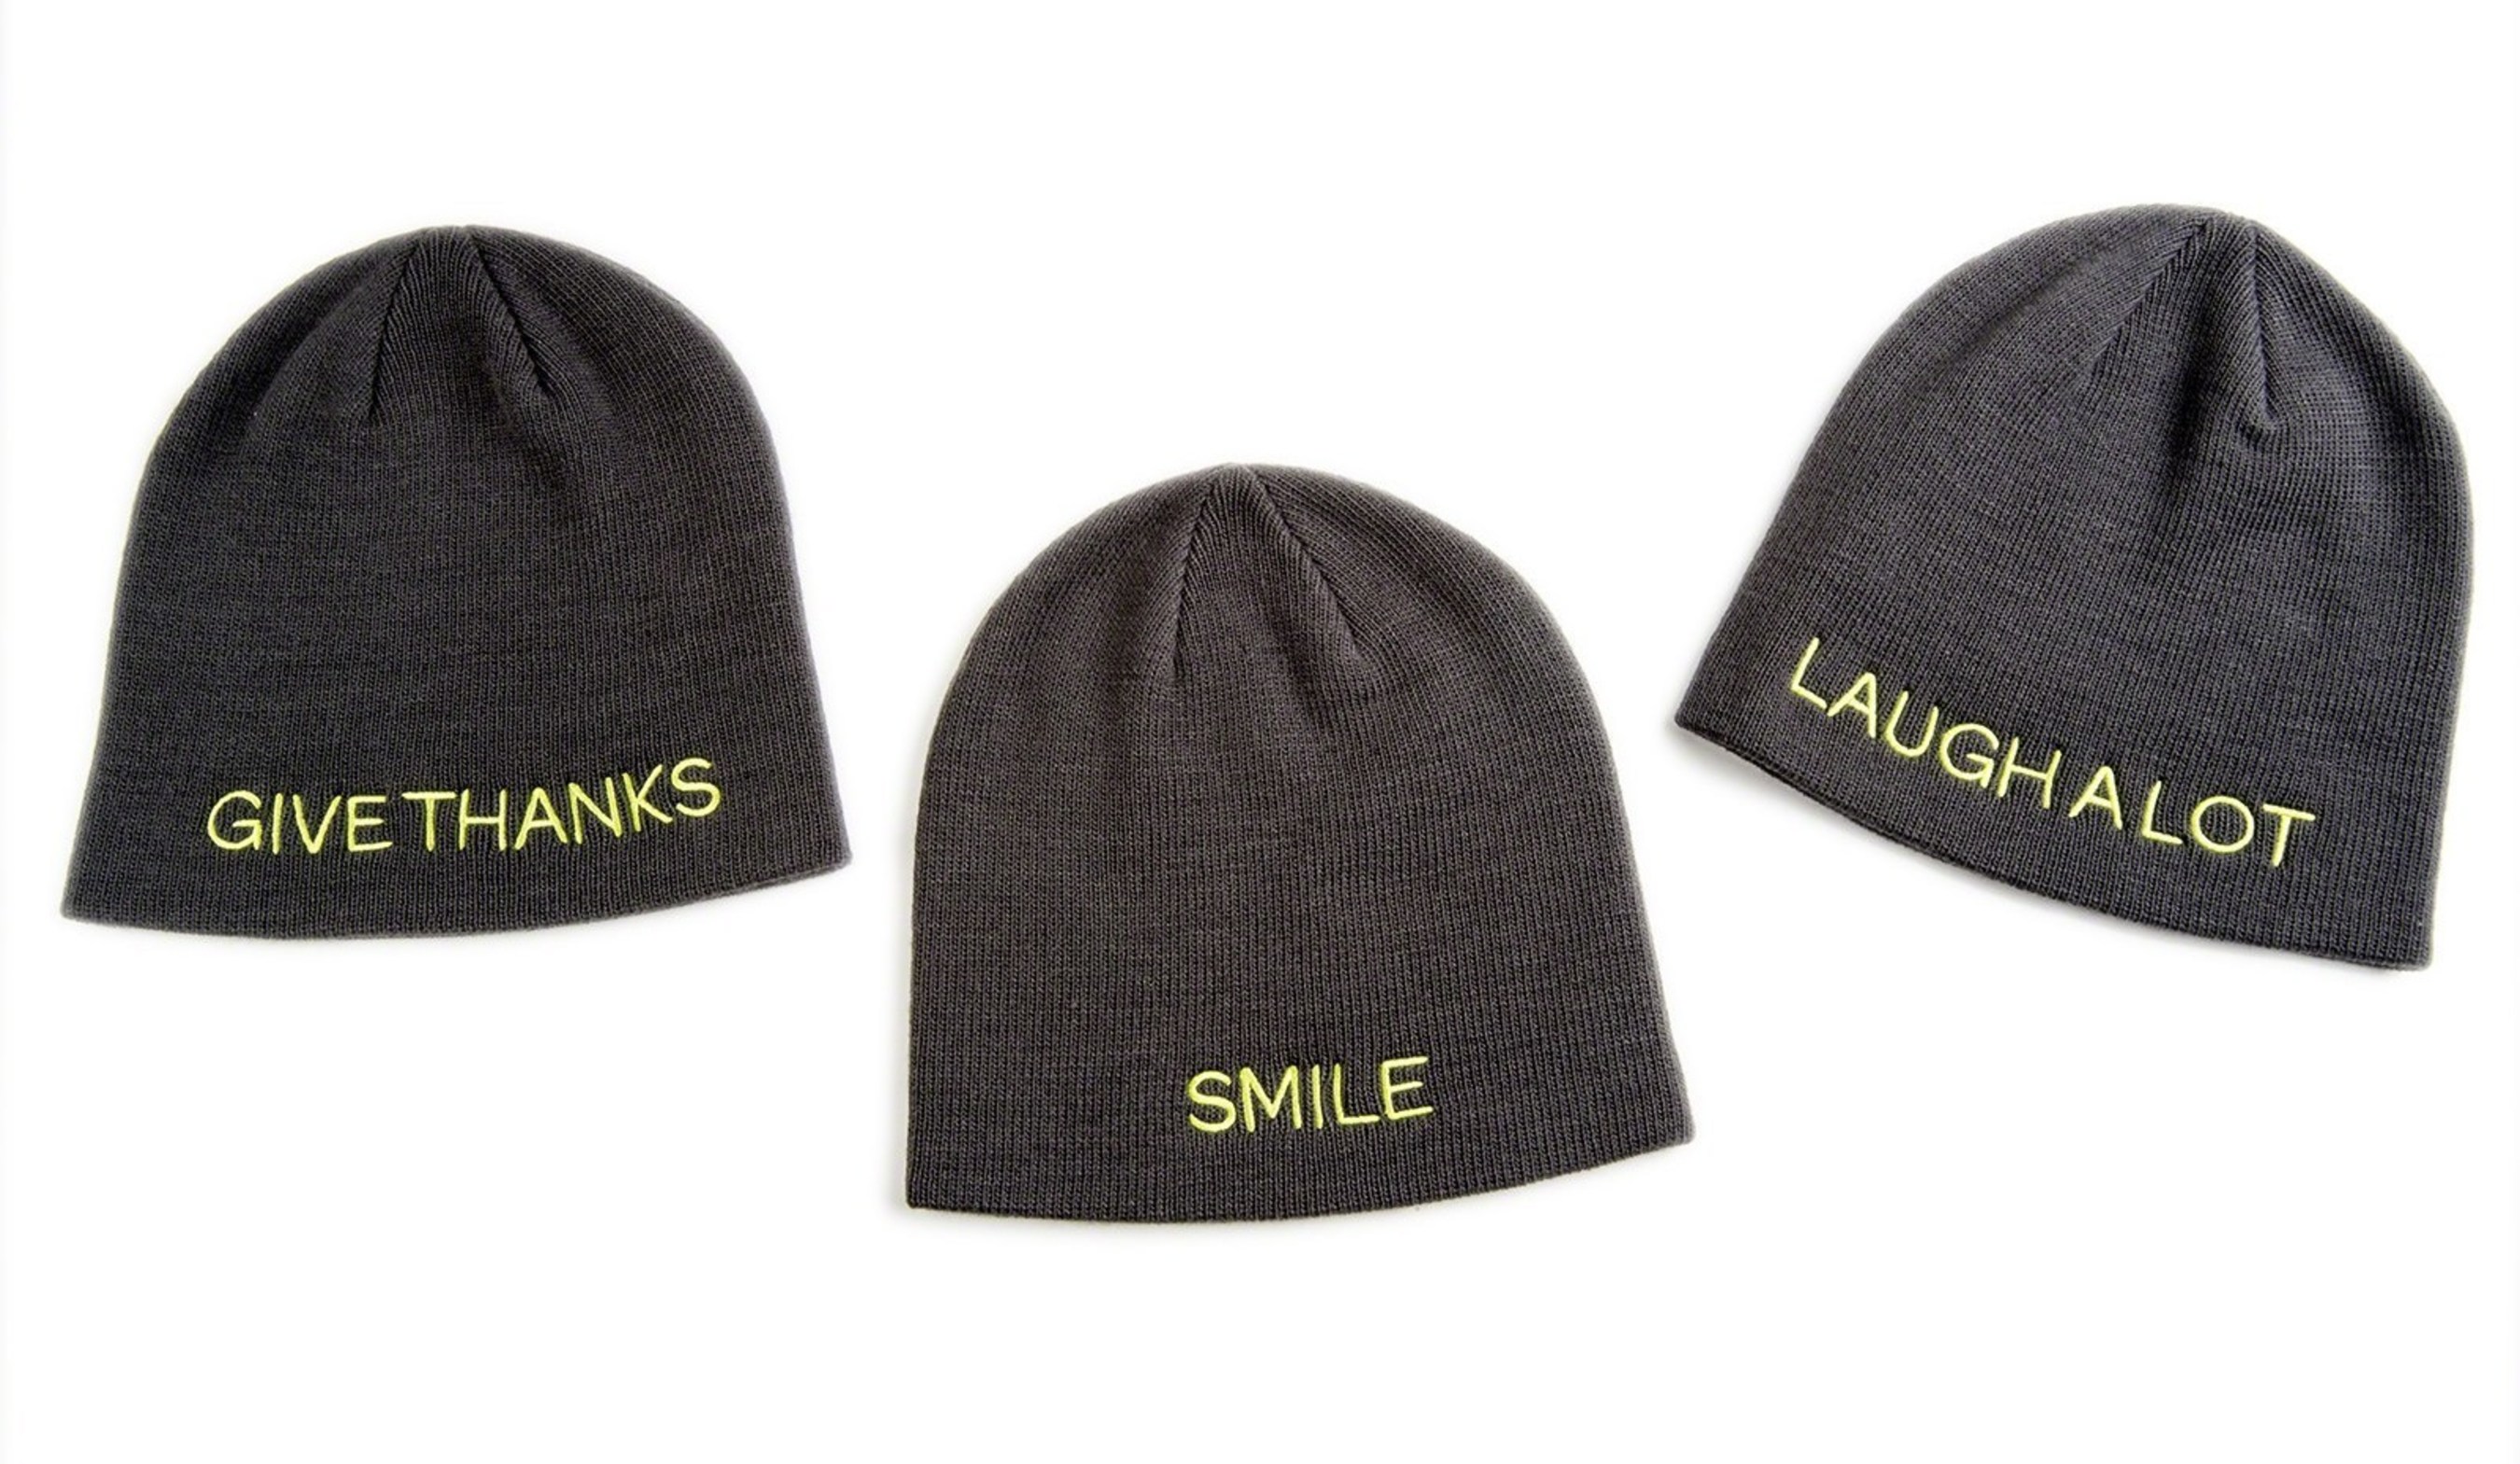 The Giving Hat(TM) is a stylish winter knit hat, one-size-fits-all and available in three versions embroidered with messages inspired by St. Jude patients and their families: "Smile," "Laugh A Lot," and "Give Thanks." The Giving Hat(TM) is available exclusively this holiday season at all Kmart stores or online at kmart.com/stjude